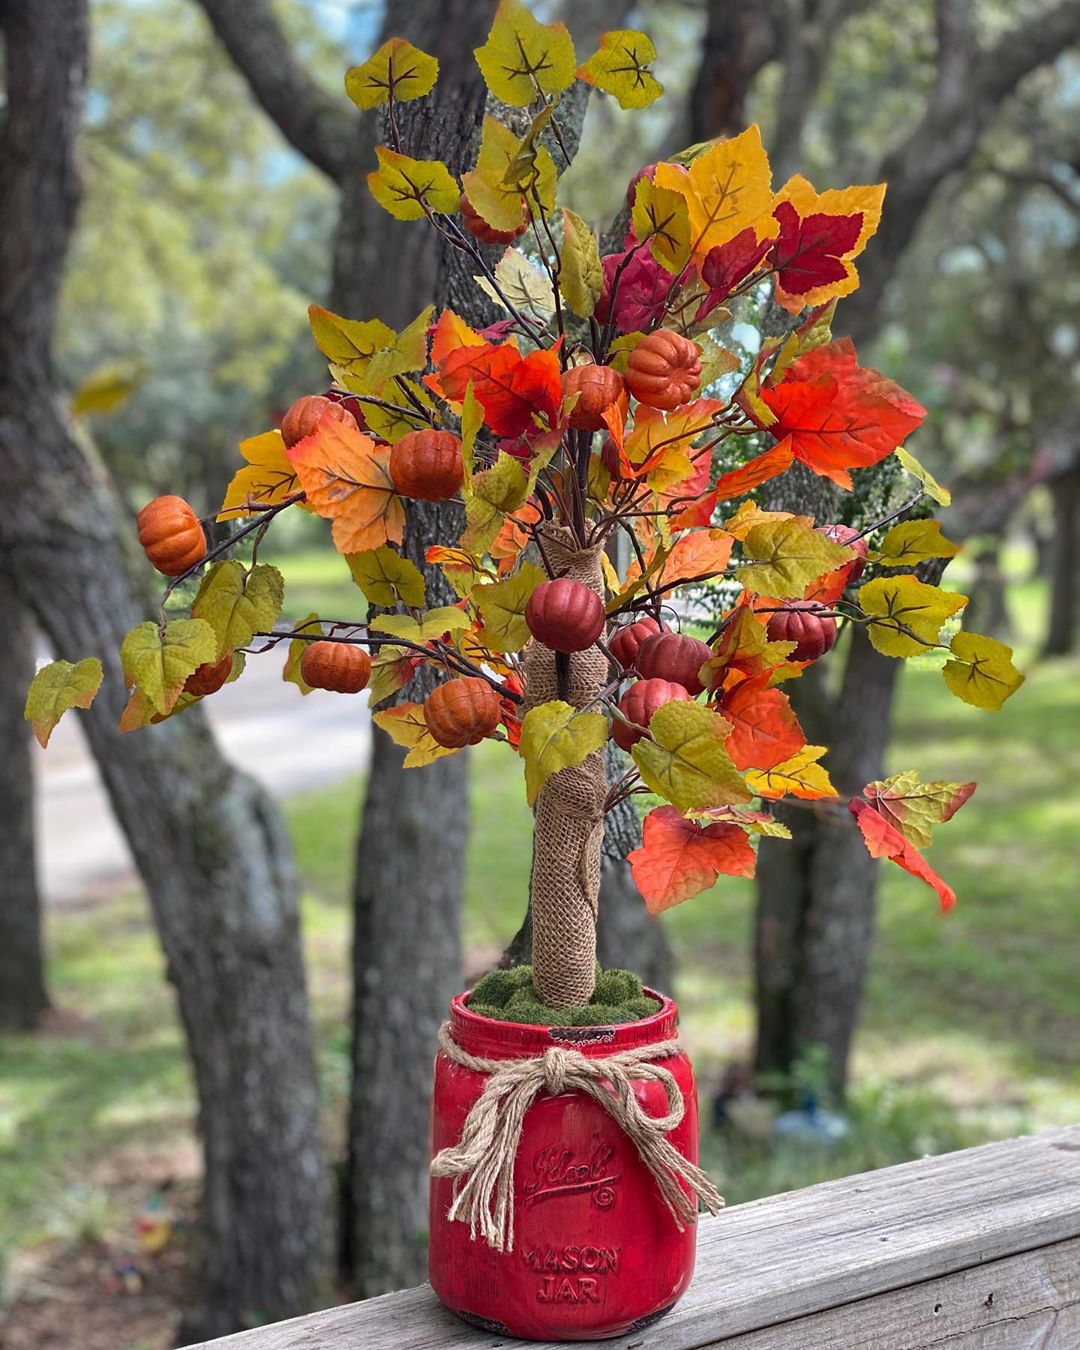 Mini Fall Tree with Pumpkins and Leaves on it. Photo by Instagram user @dreamoakdecor